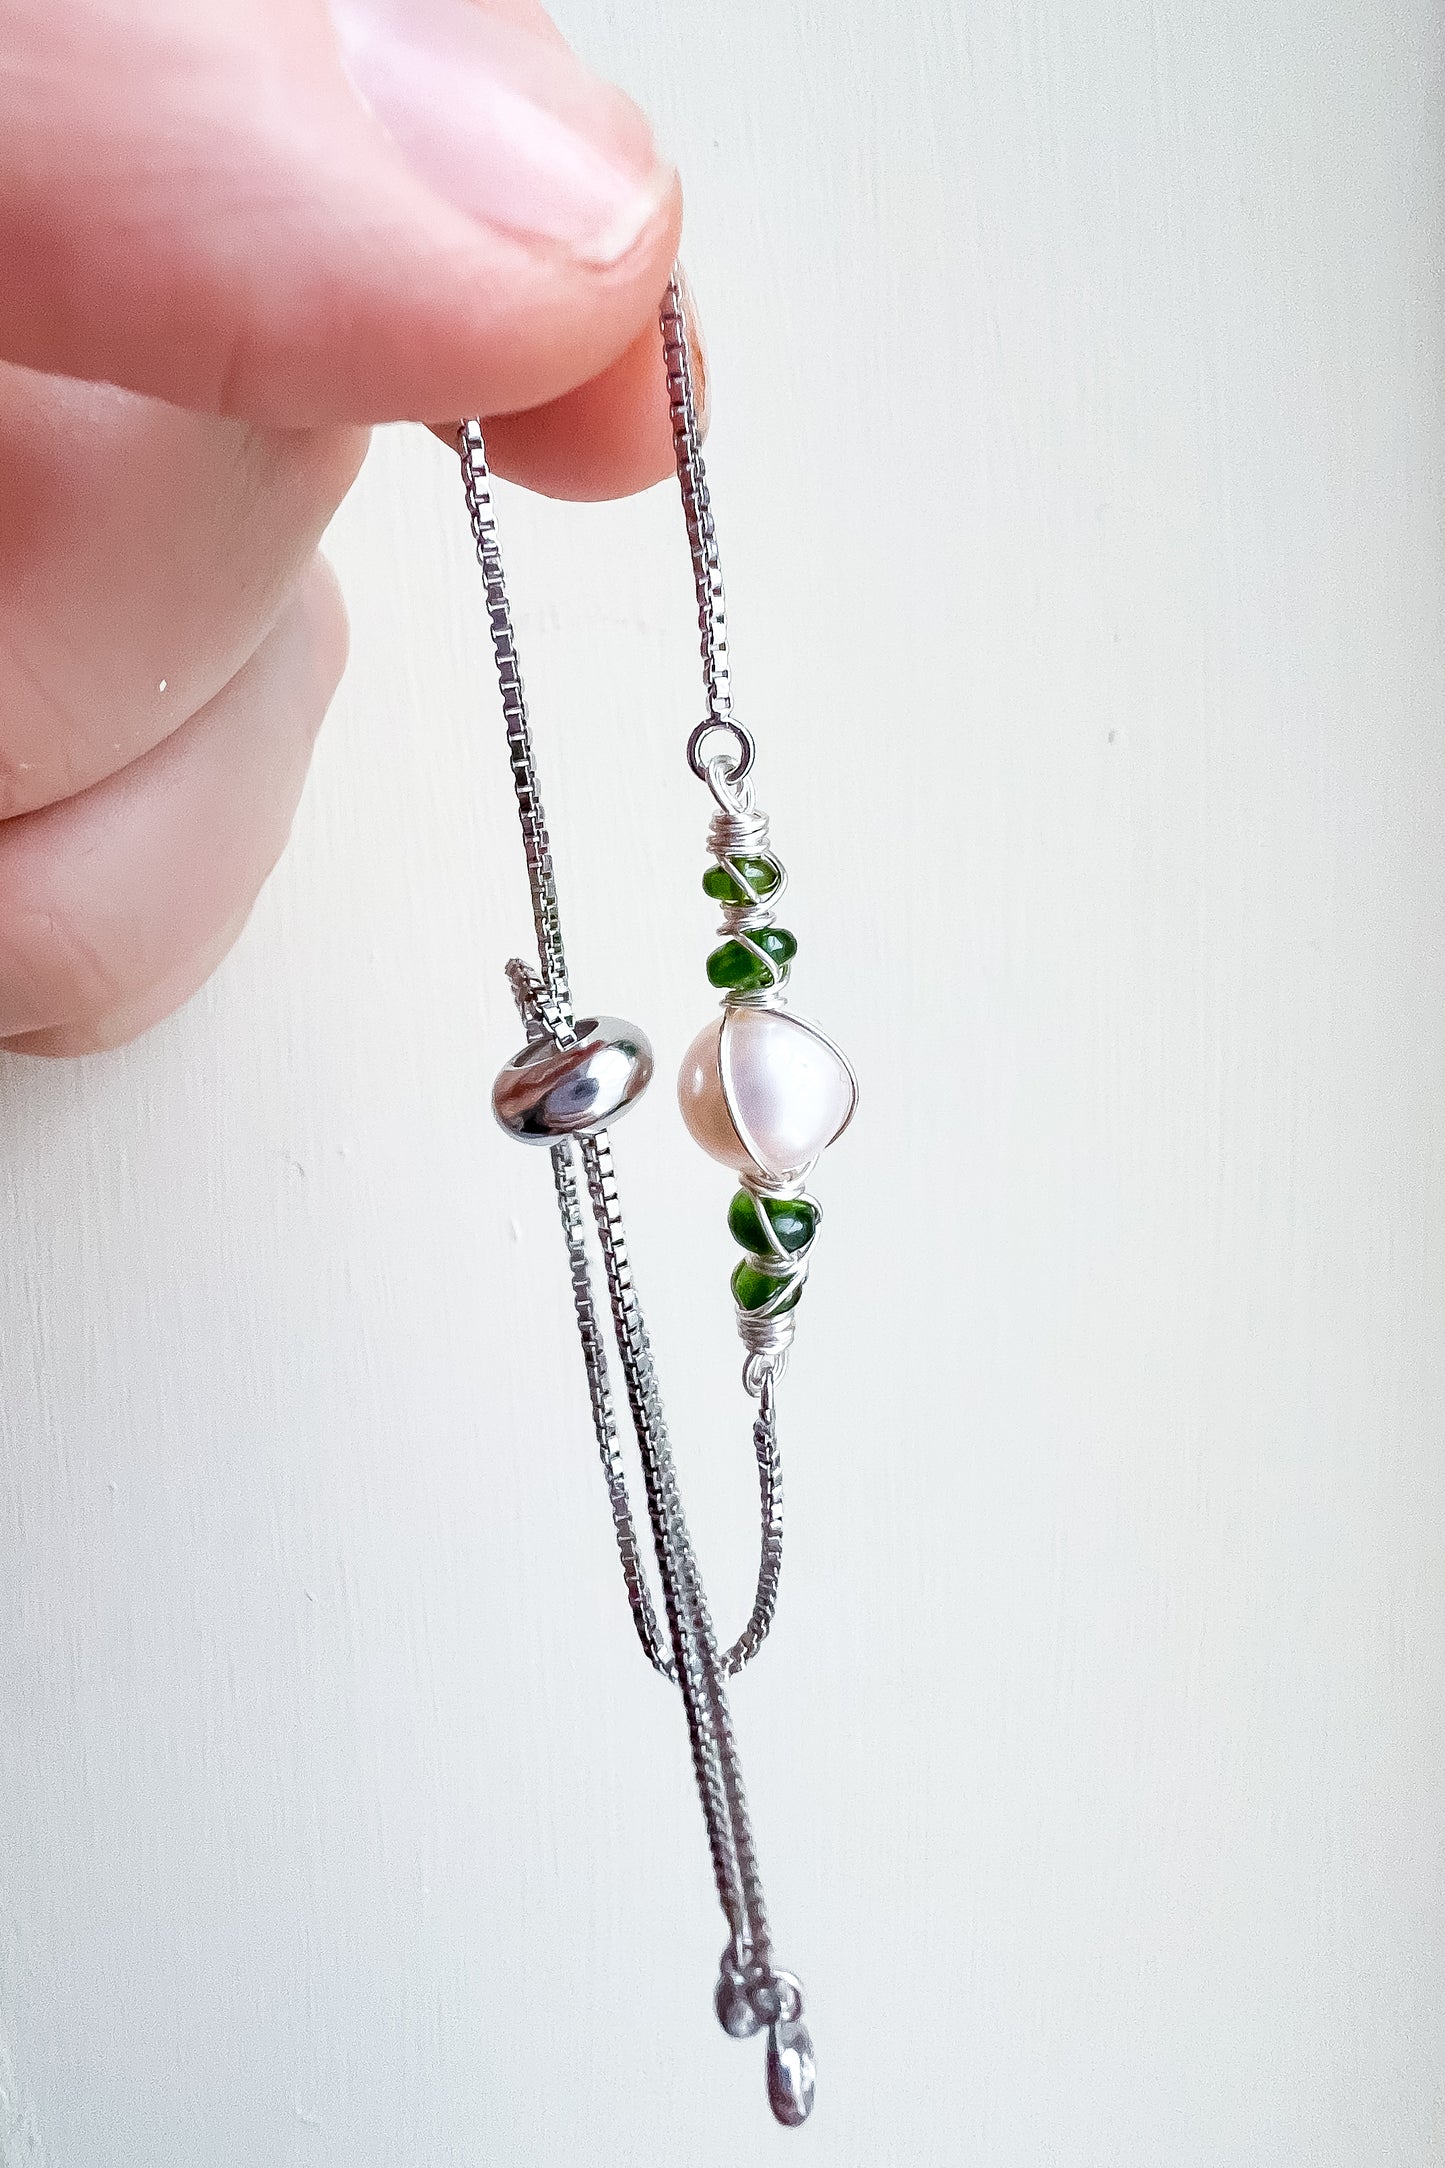 . ✨ Pearl Bracelet Collection ✨ Chrome Diopside